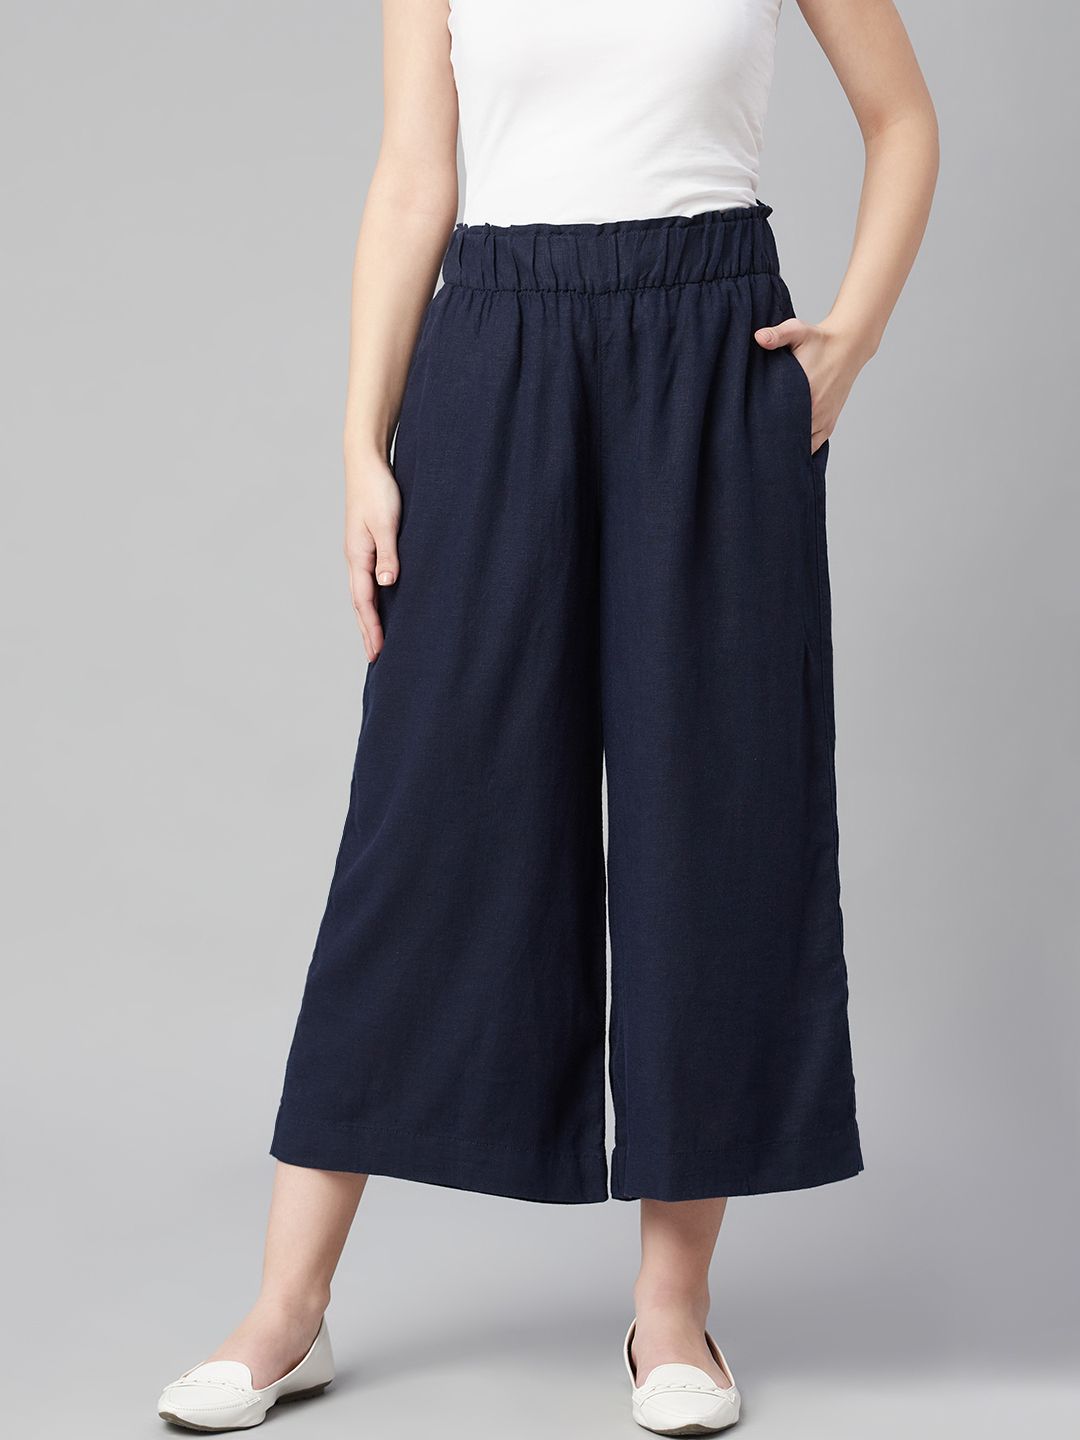 Marks & Spencer Women Navy Blue Pleated Culottes Trousers Price in India